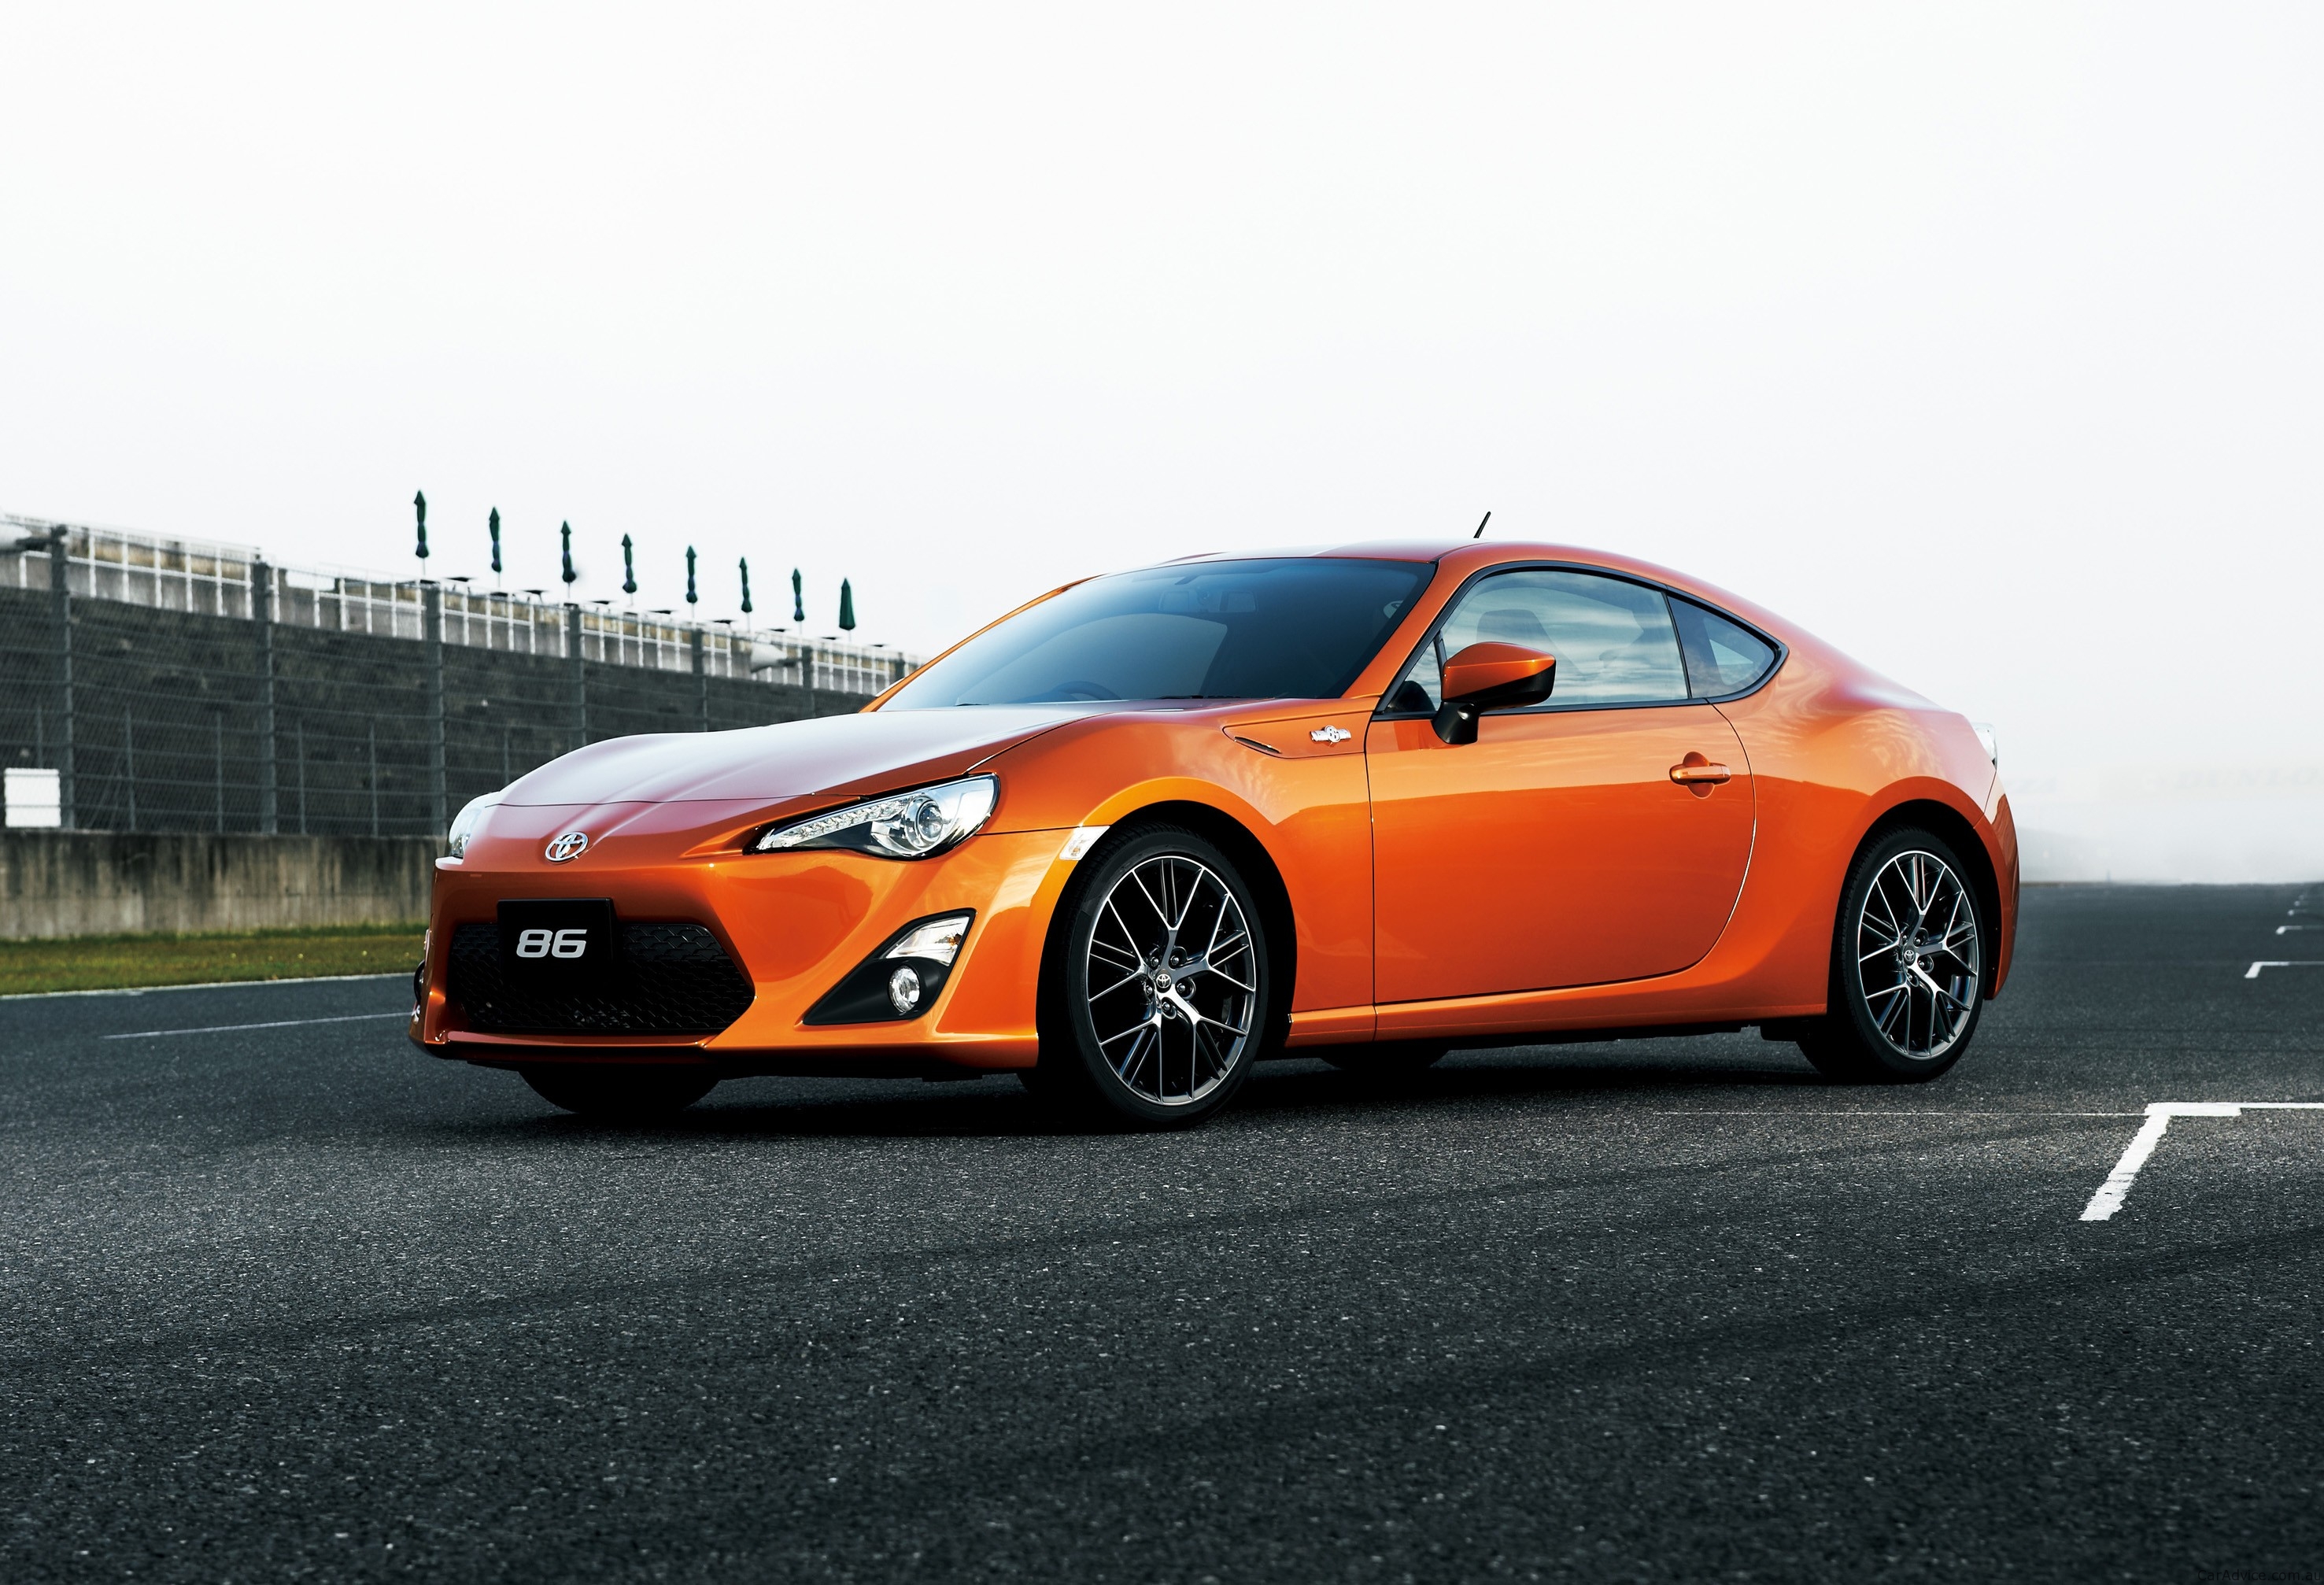 Toyota 86 sports car revealed: official pictures & details - photos